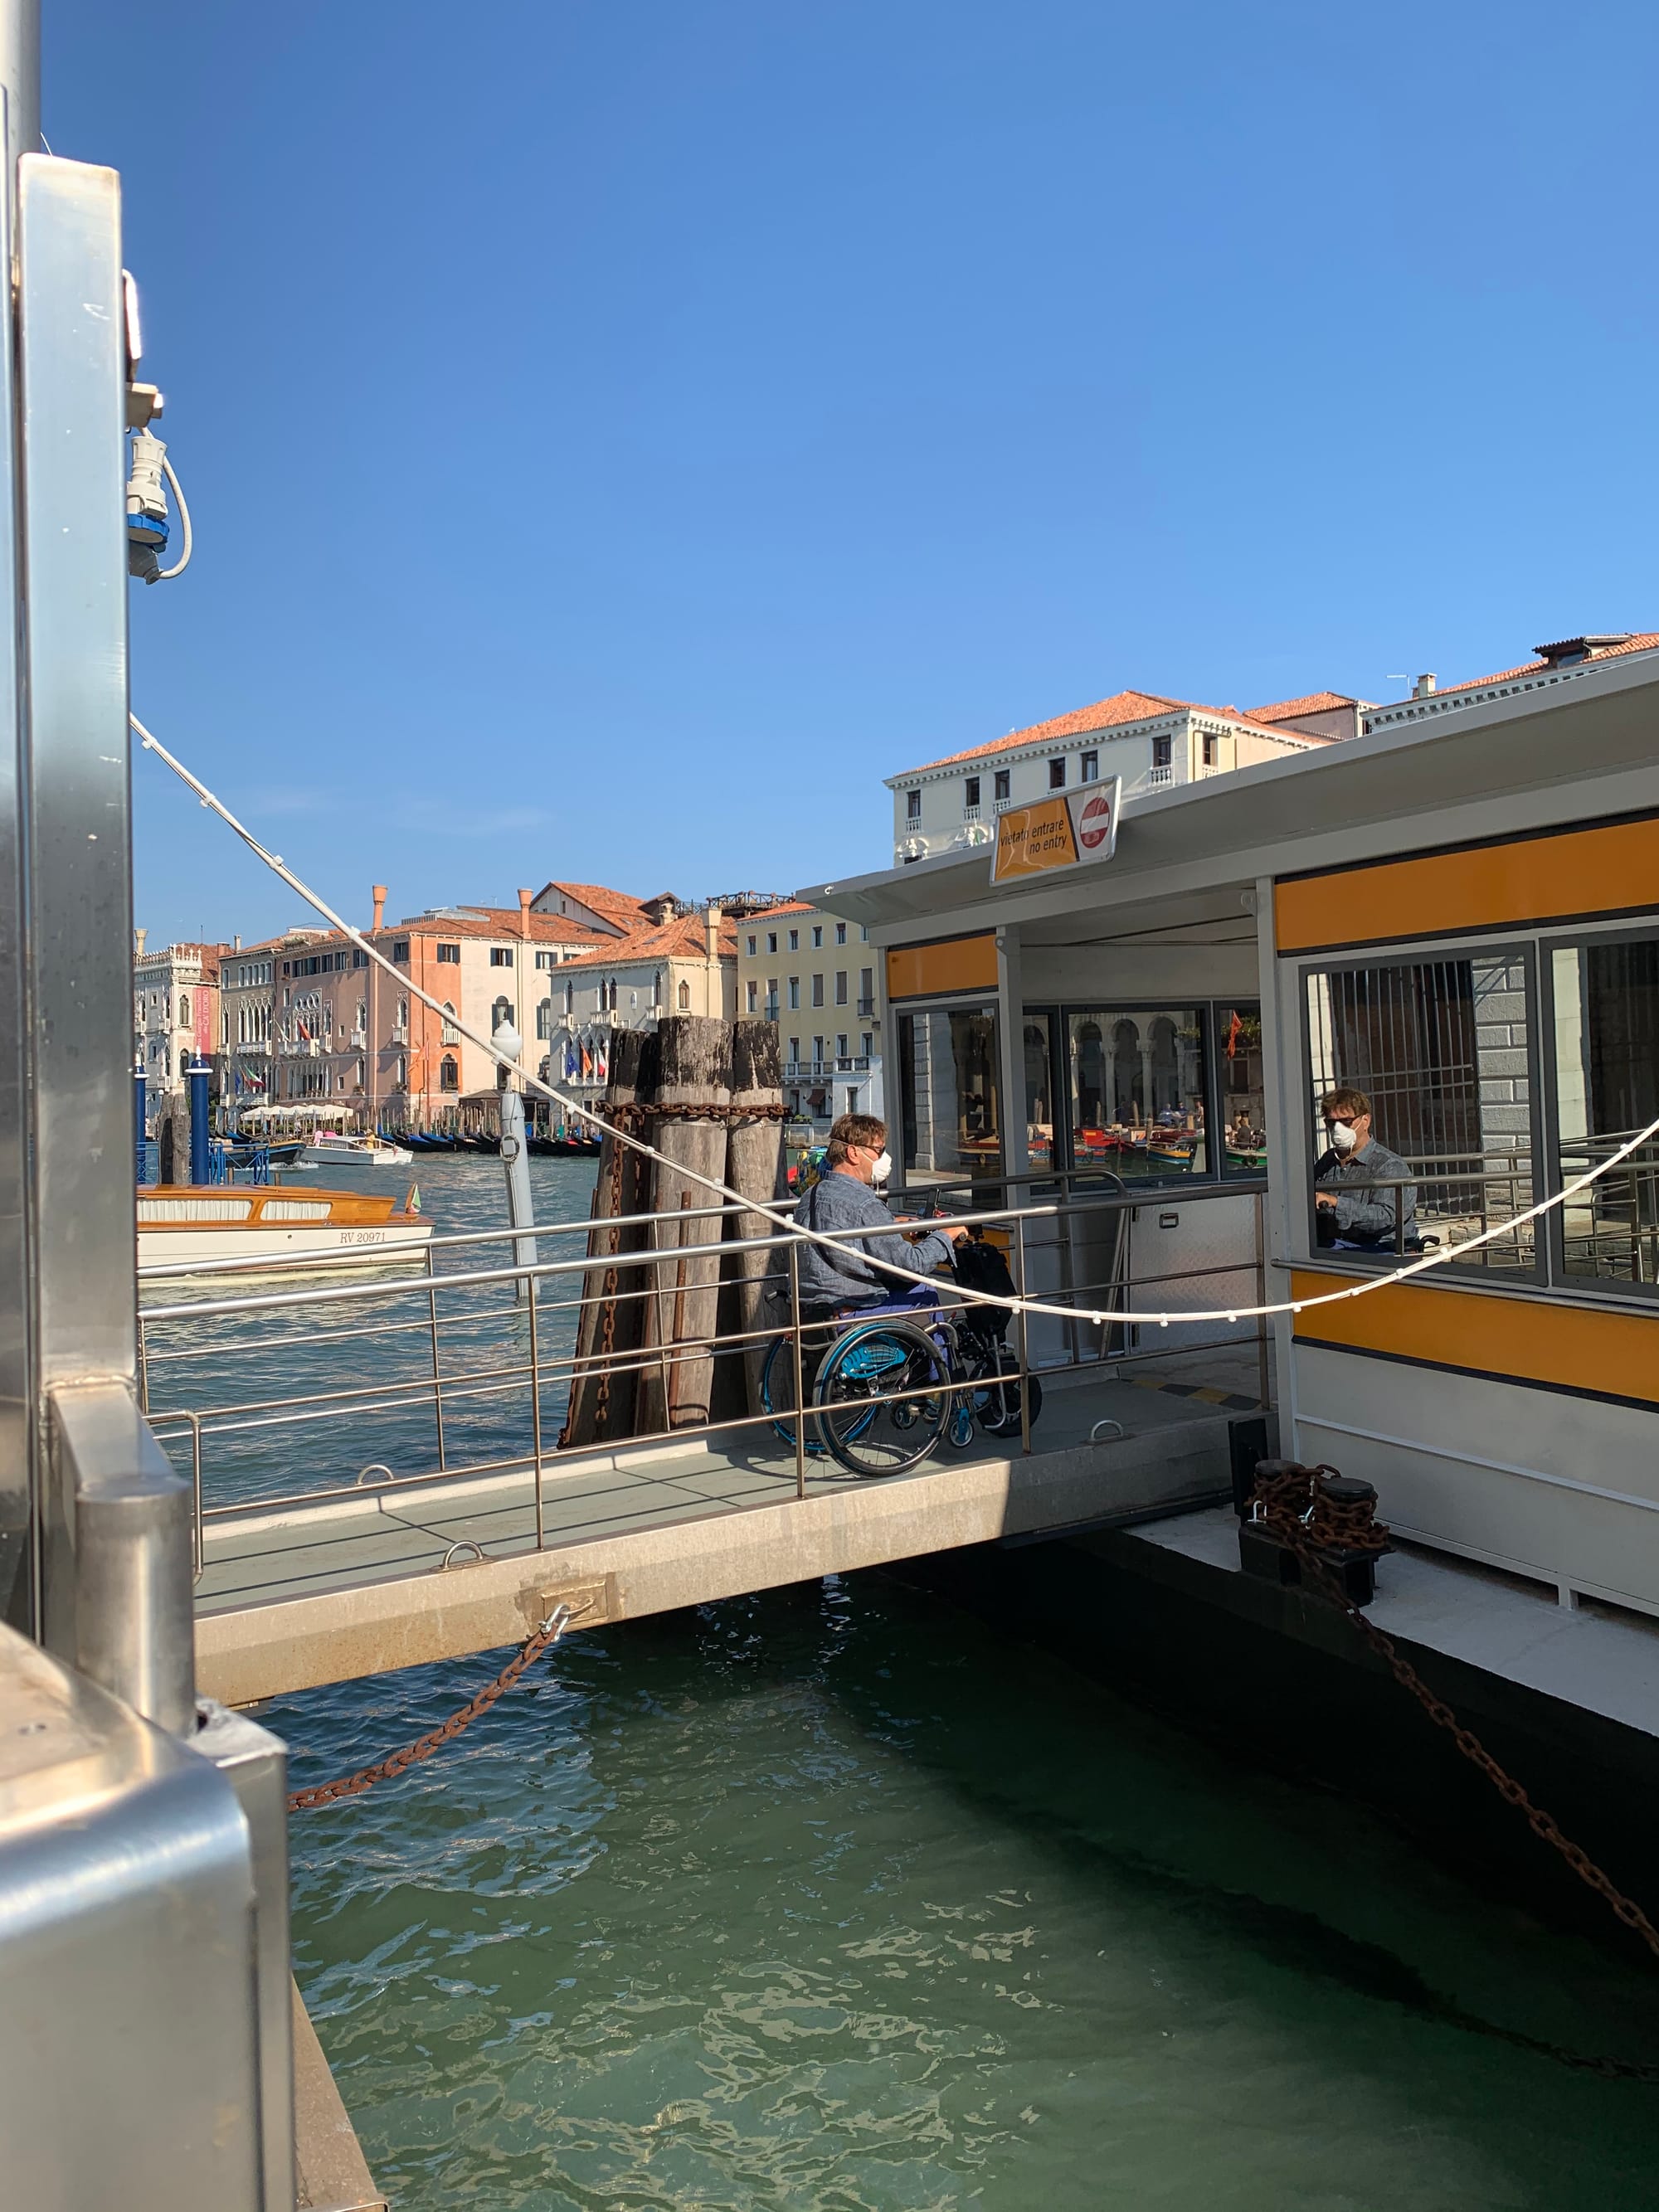 Vaporettos are an accessible way to get around the city of Venice